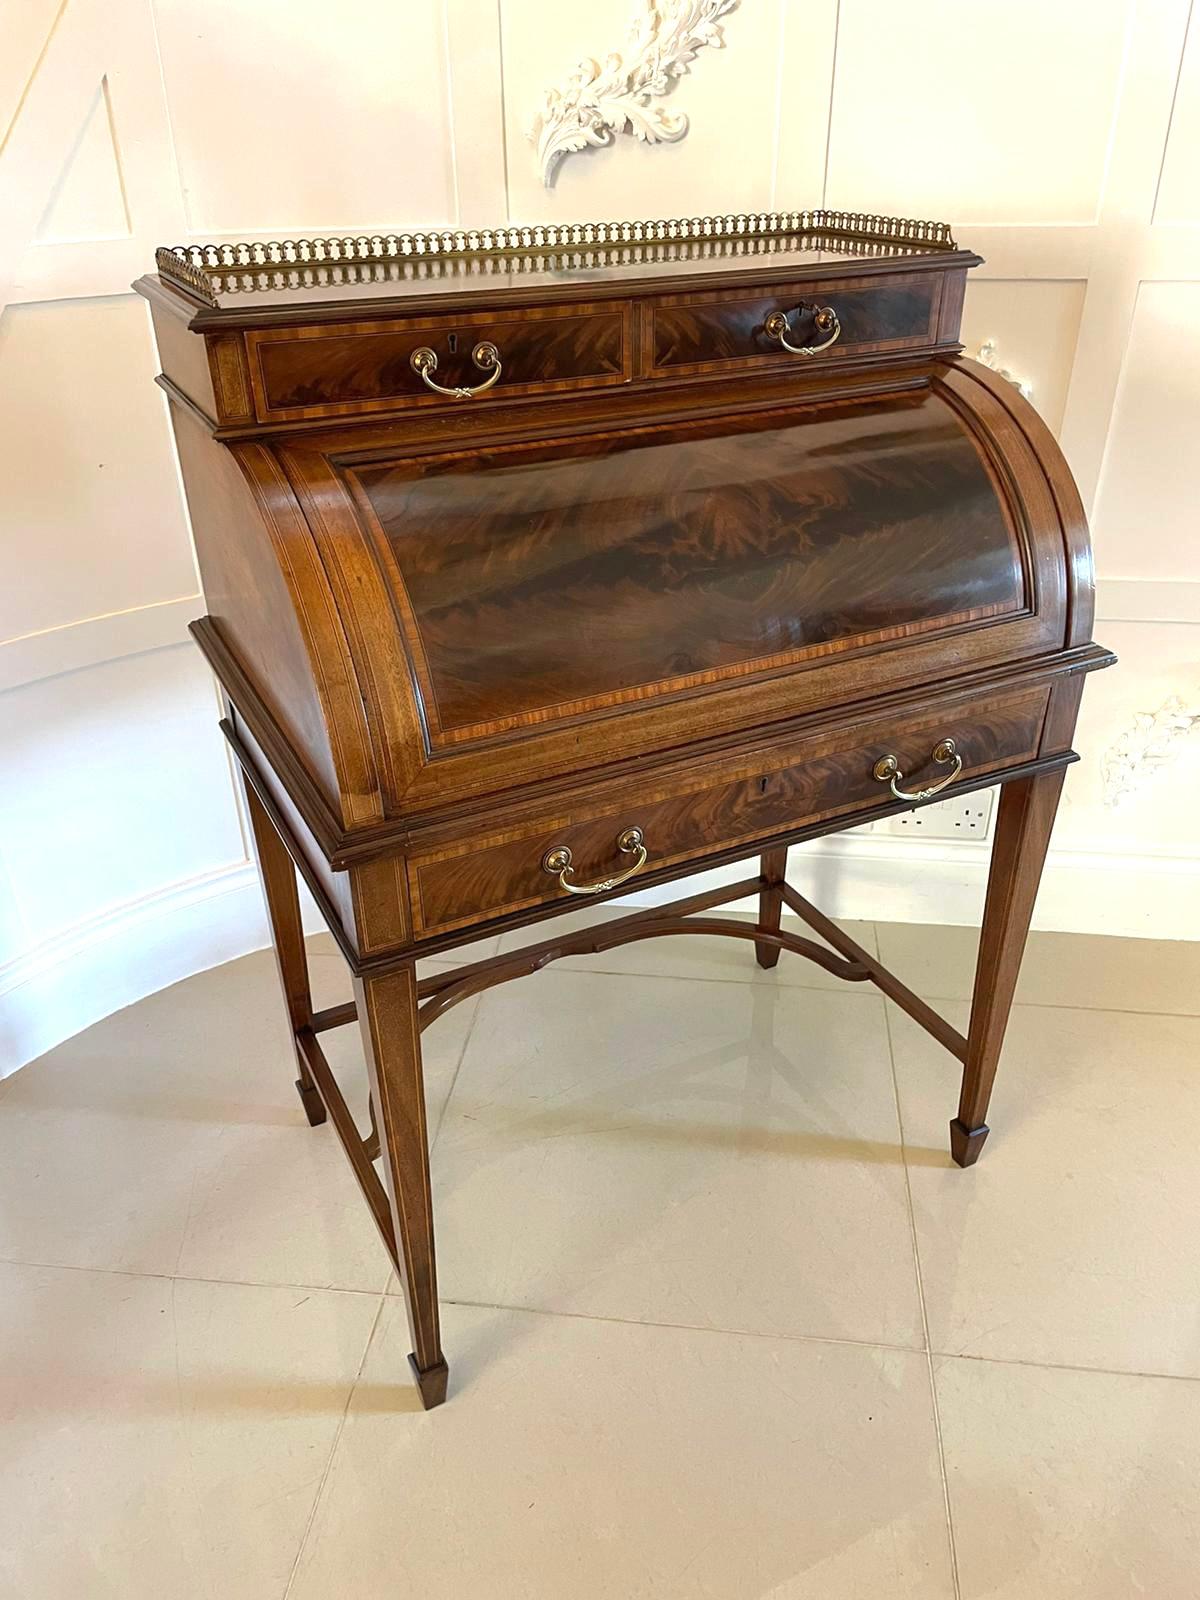 Fine quality antique Edwardian freestanding mahogany inlaid cylinder desk by Maple & Co. London having the original brass gallery above two mahogany drawers with pretty satinwood crossbanding and original brass handles above a cylinder top desk with